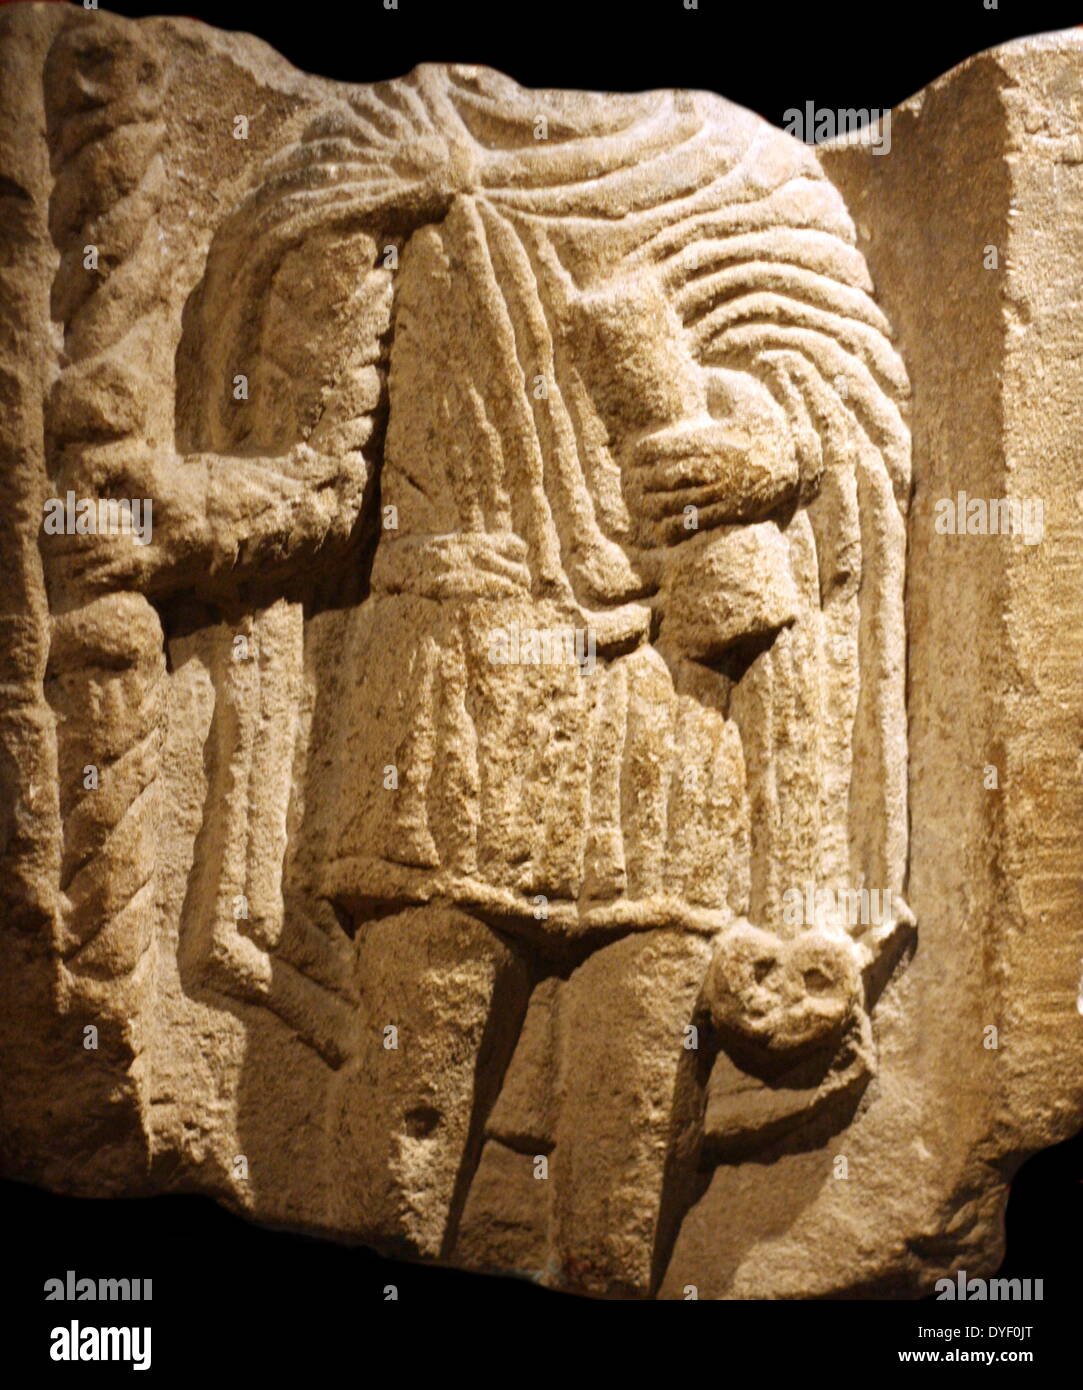 Relief image of a learned man, found in the Roman Baths. Circa 1st-3rd century AD. Shown holding a scroll indicating he is educated. The head is missing from deterioration. Stock Photo